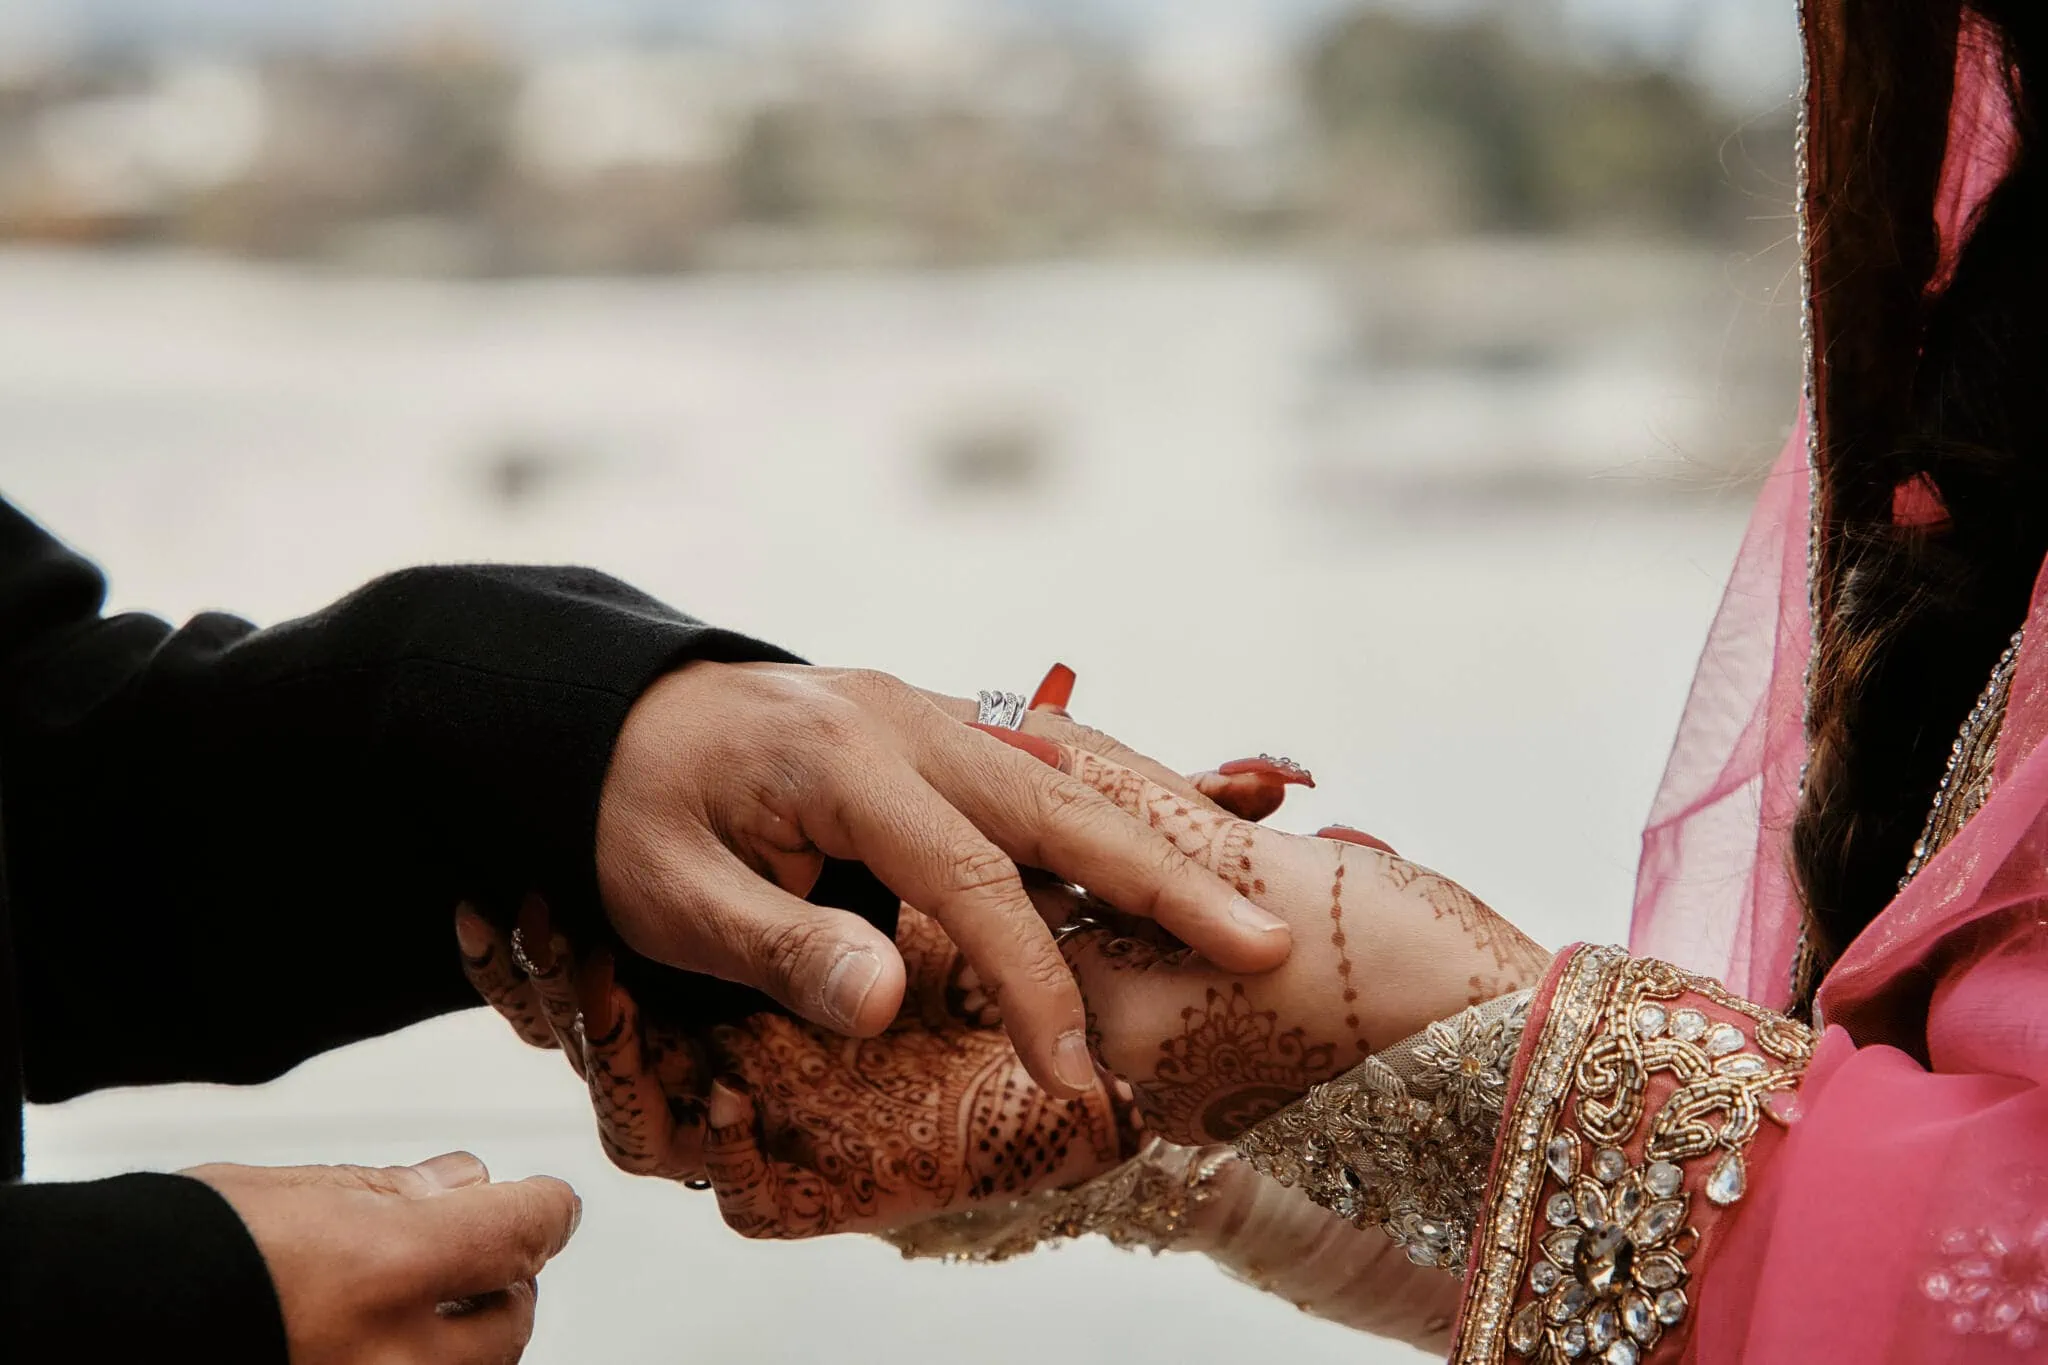 Queenstown New Zealand Elopement Wedding Photographer - Wasim and Yumn's Queenstown Islamic Wedding features a loving moment as they join their hands together.